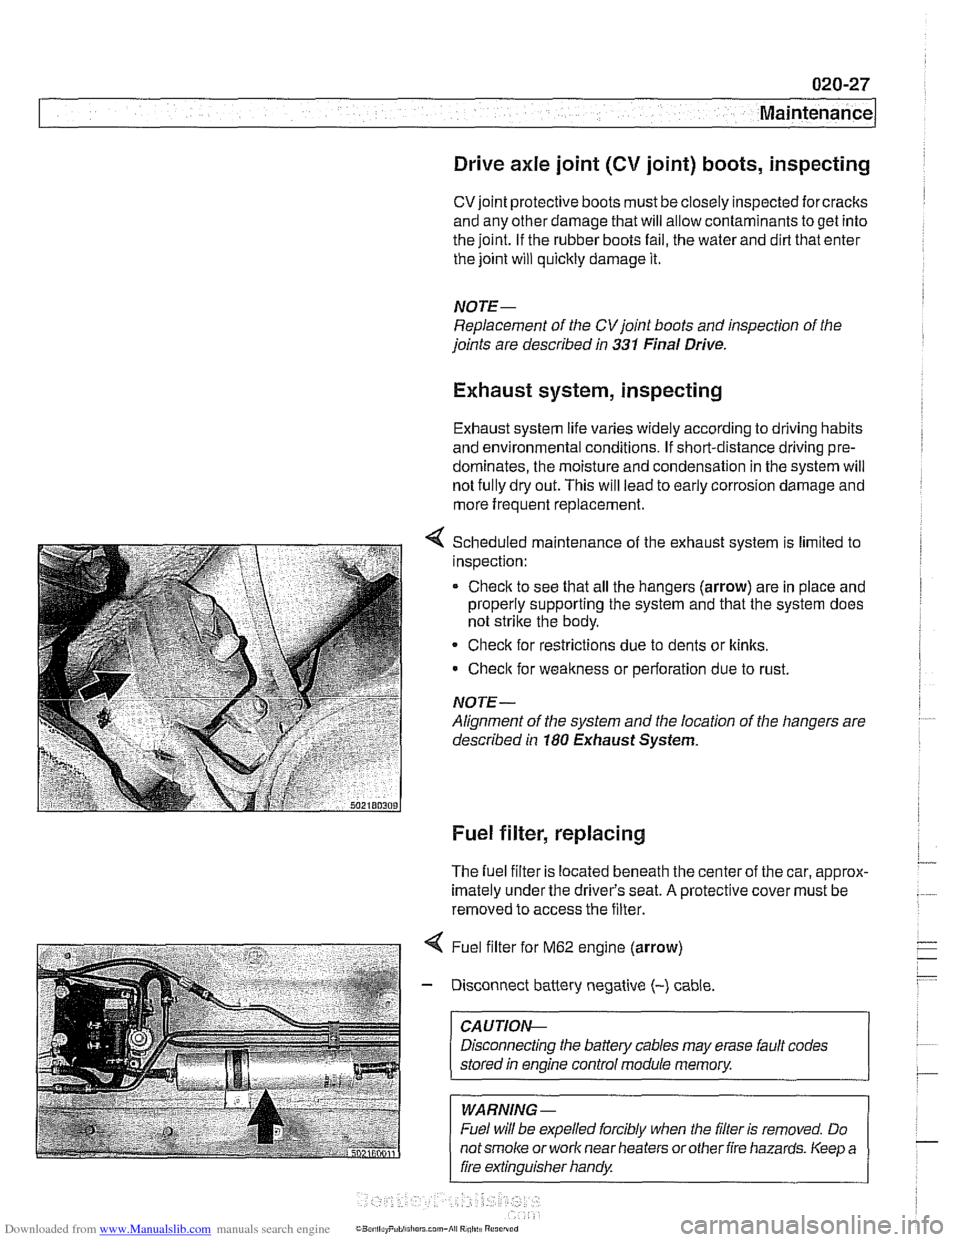 BMW 525i 2001 E39 Workshop Manual Downloaded from www.Manualslib.com manuals search engine 
.-. - 
Maintenance 
Drive axle joint 
(CV joint)  boots, inspecting 
CVjoint protective  boots must be closely inspected  forcracks 
and any o